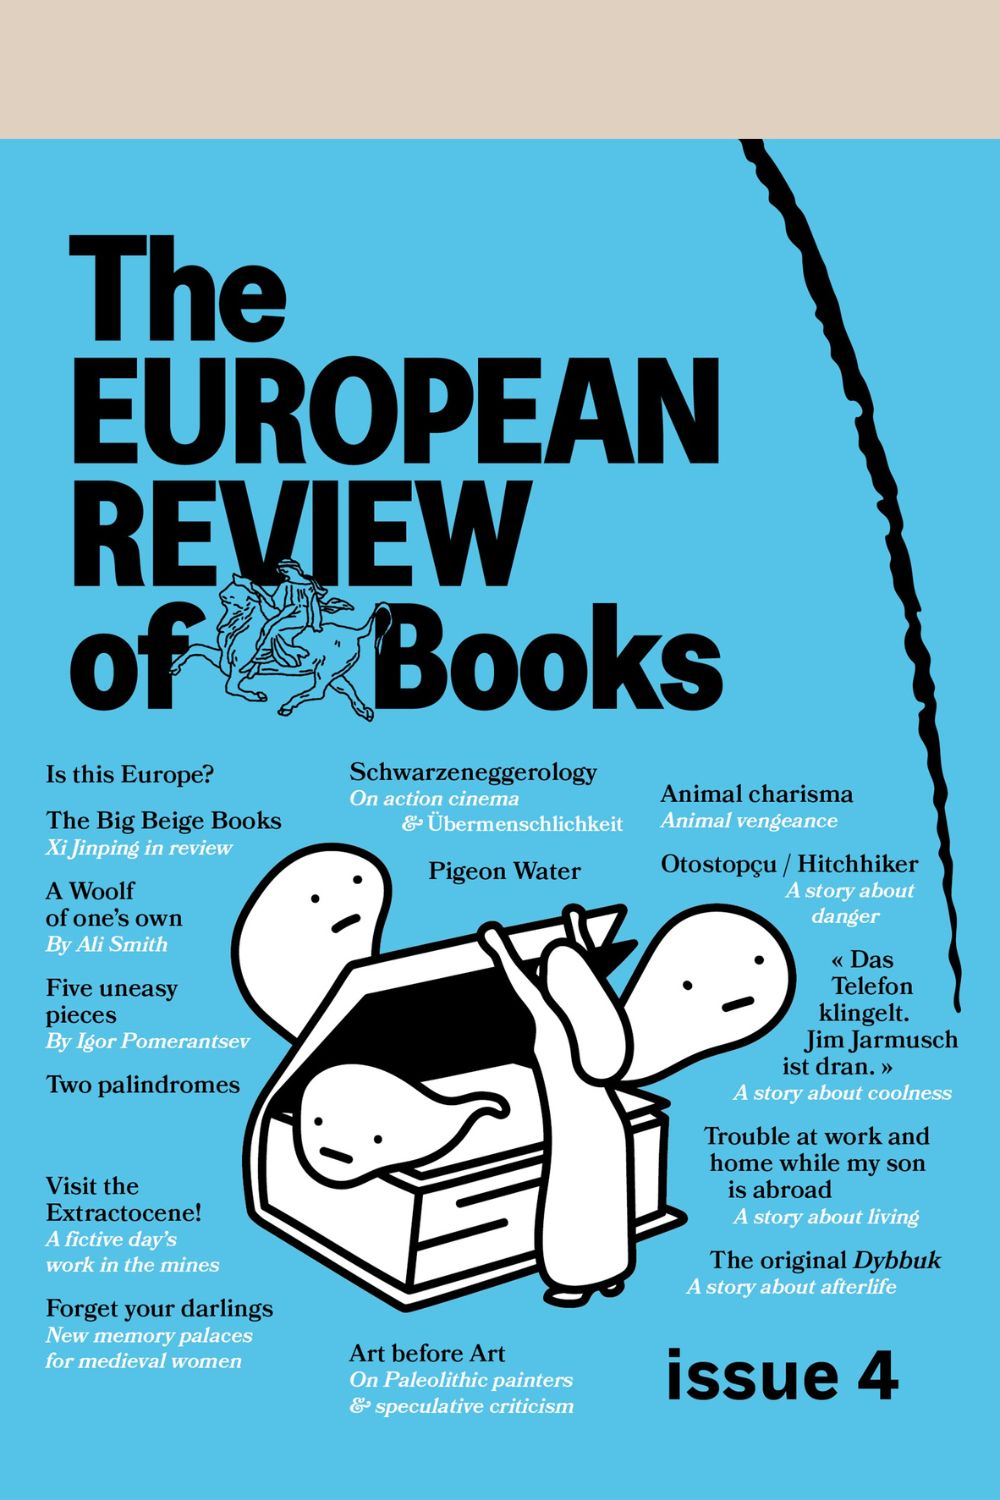 European Review of Books Issue 4 cover - bright blue background with text and illustration of women opening a book and white blob-like ghosts coming out